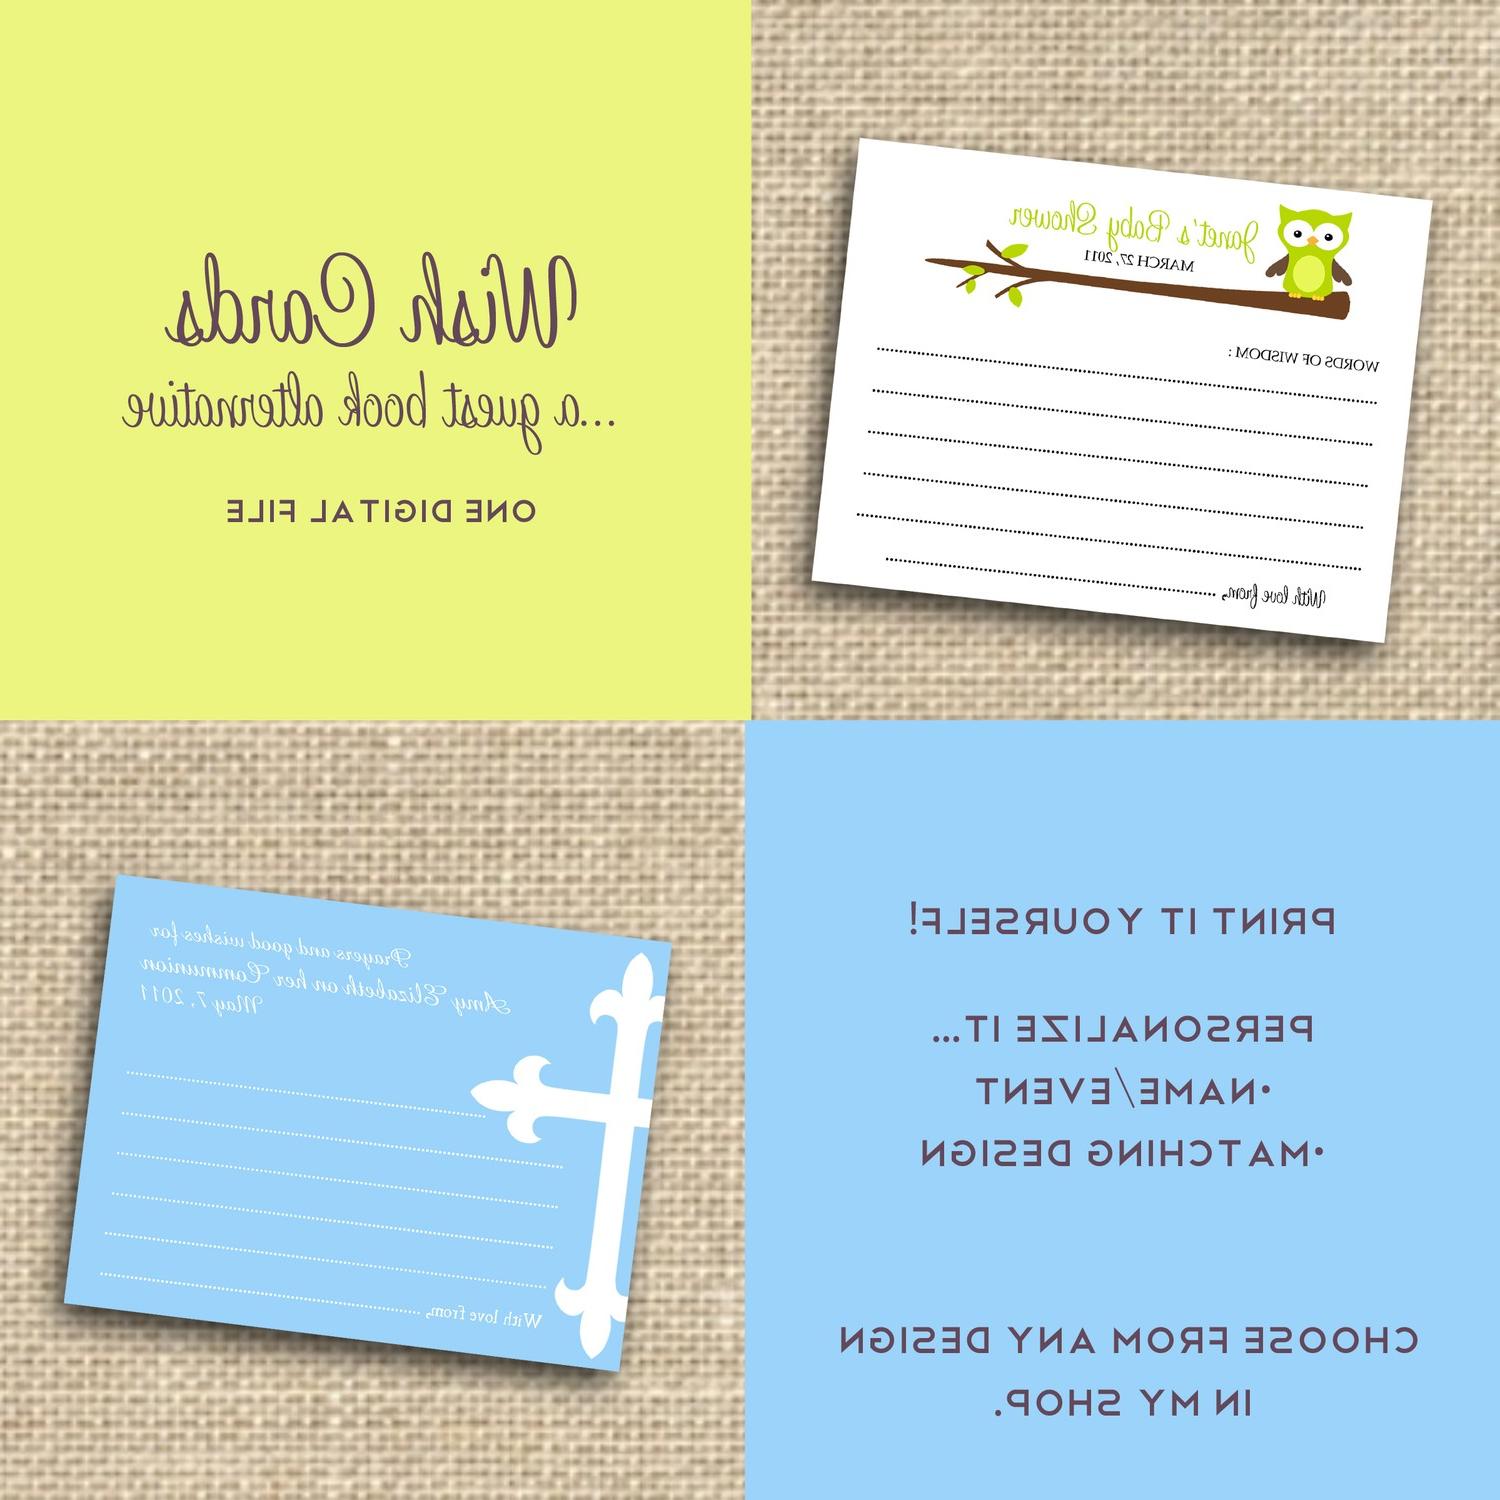 funny wedding card messages